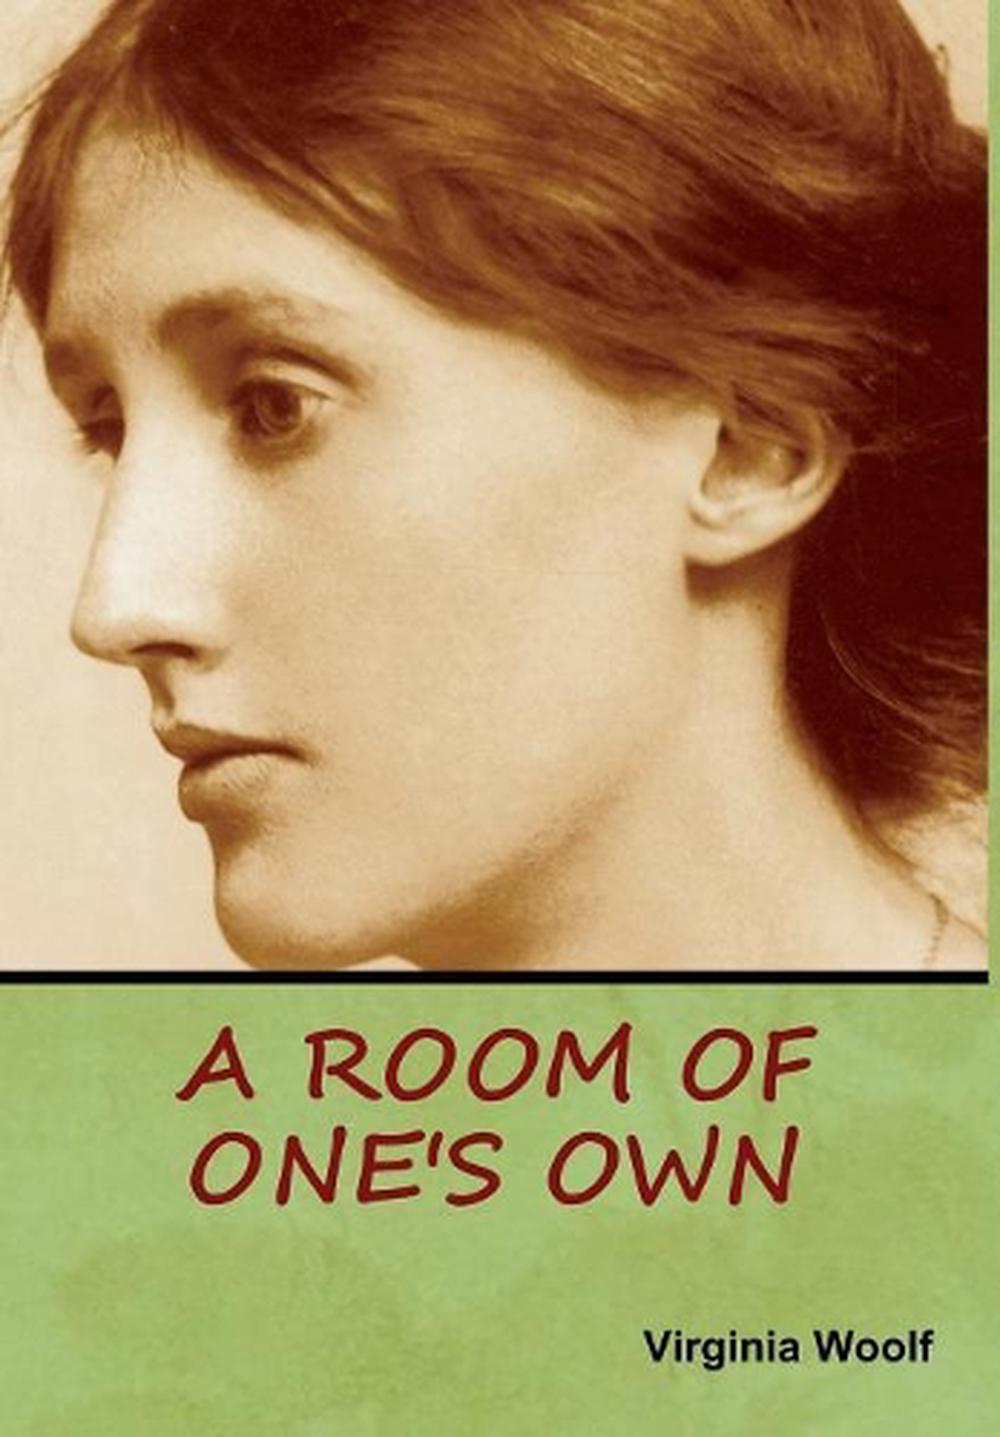 virginia woolf essay a room of one's